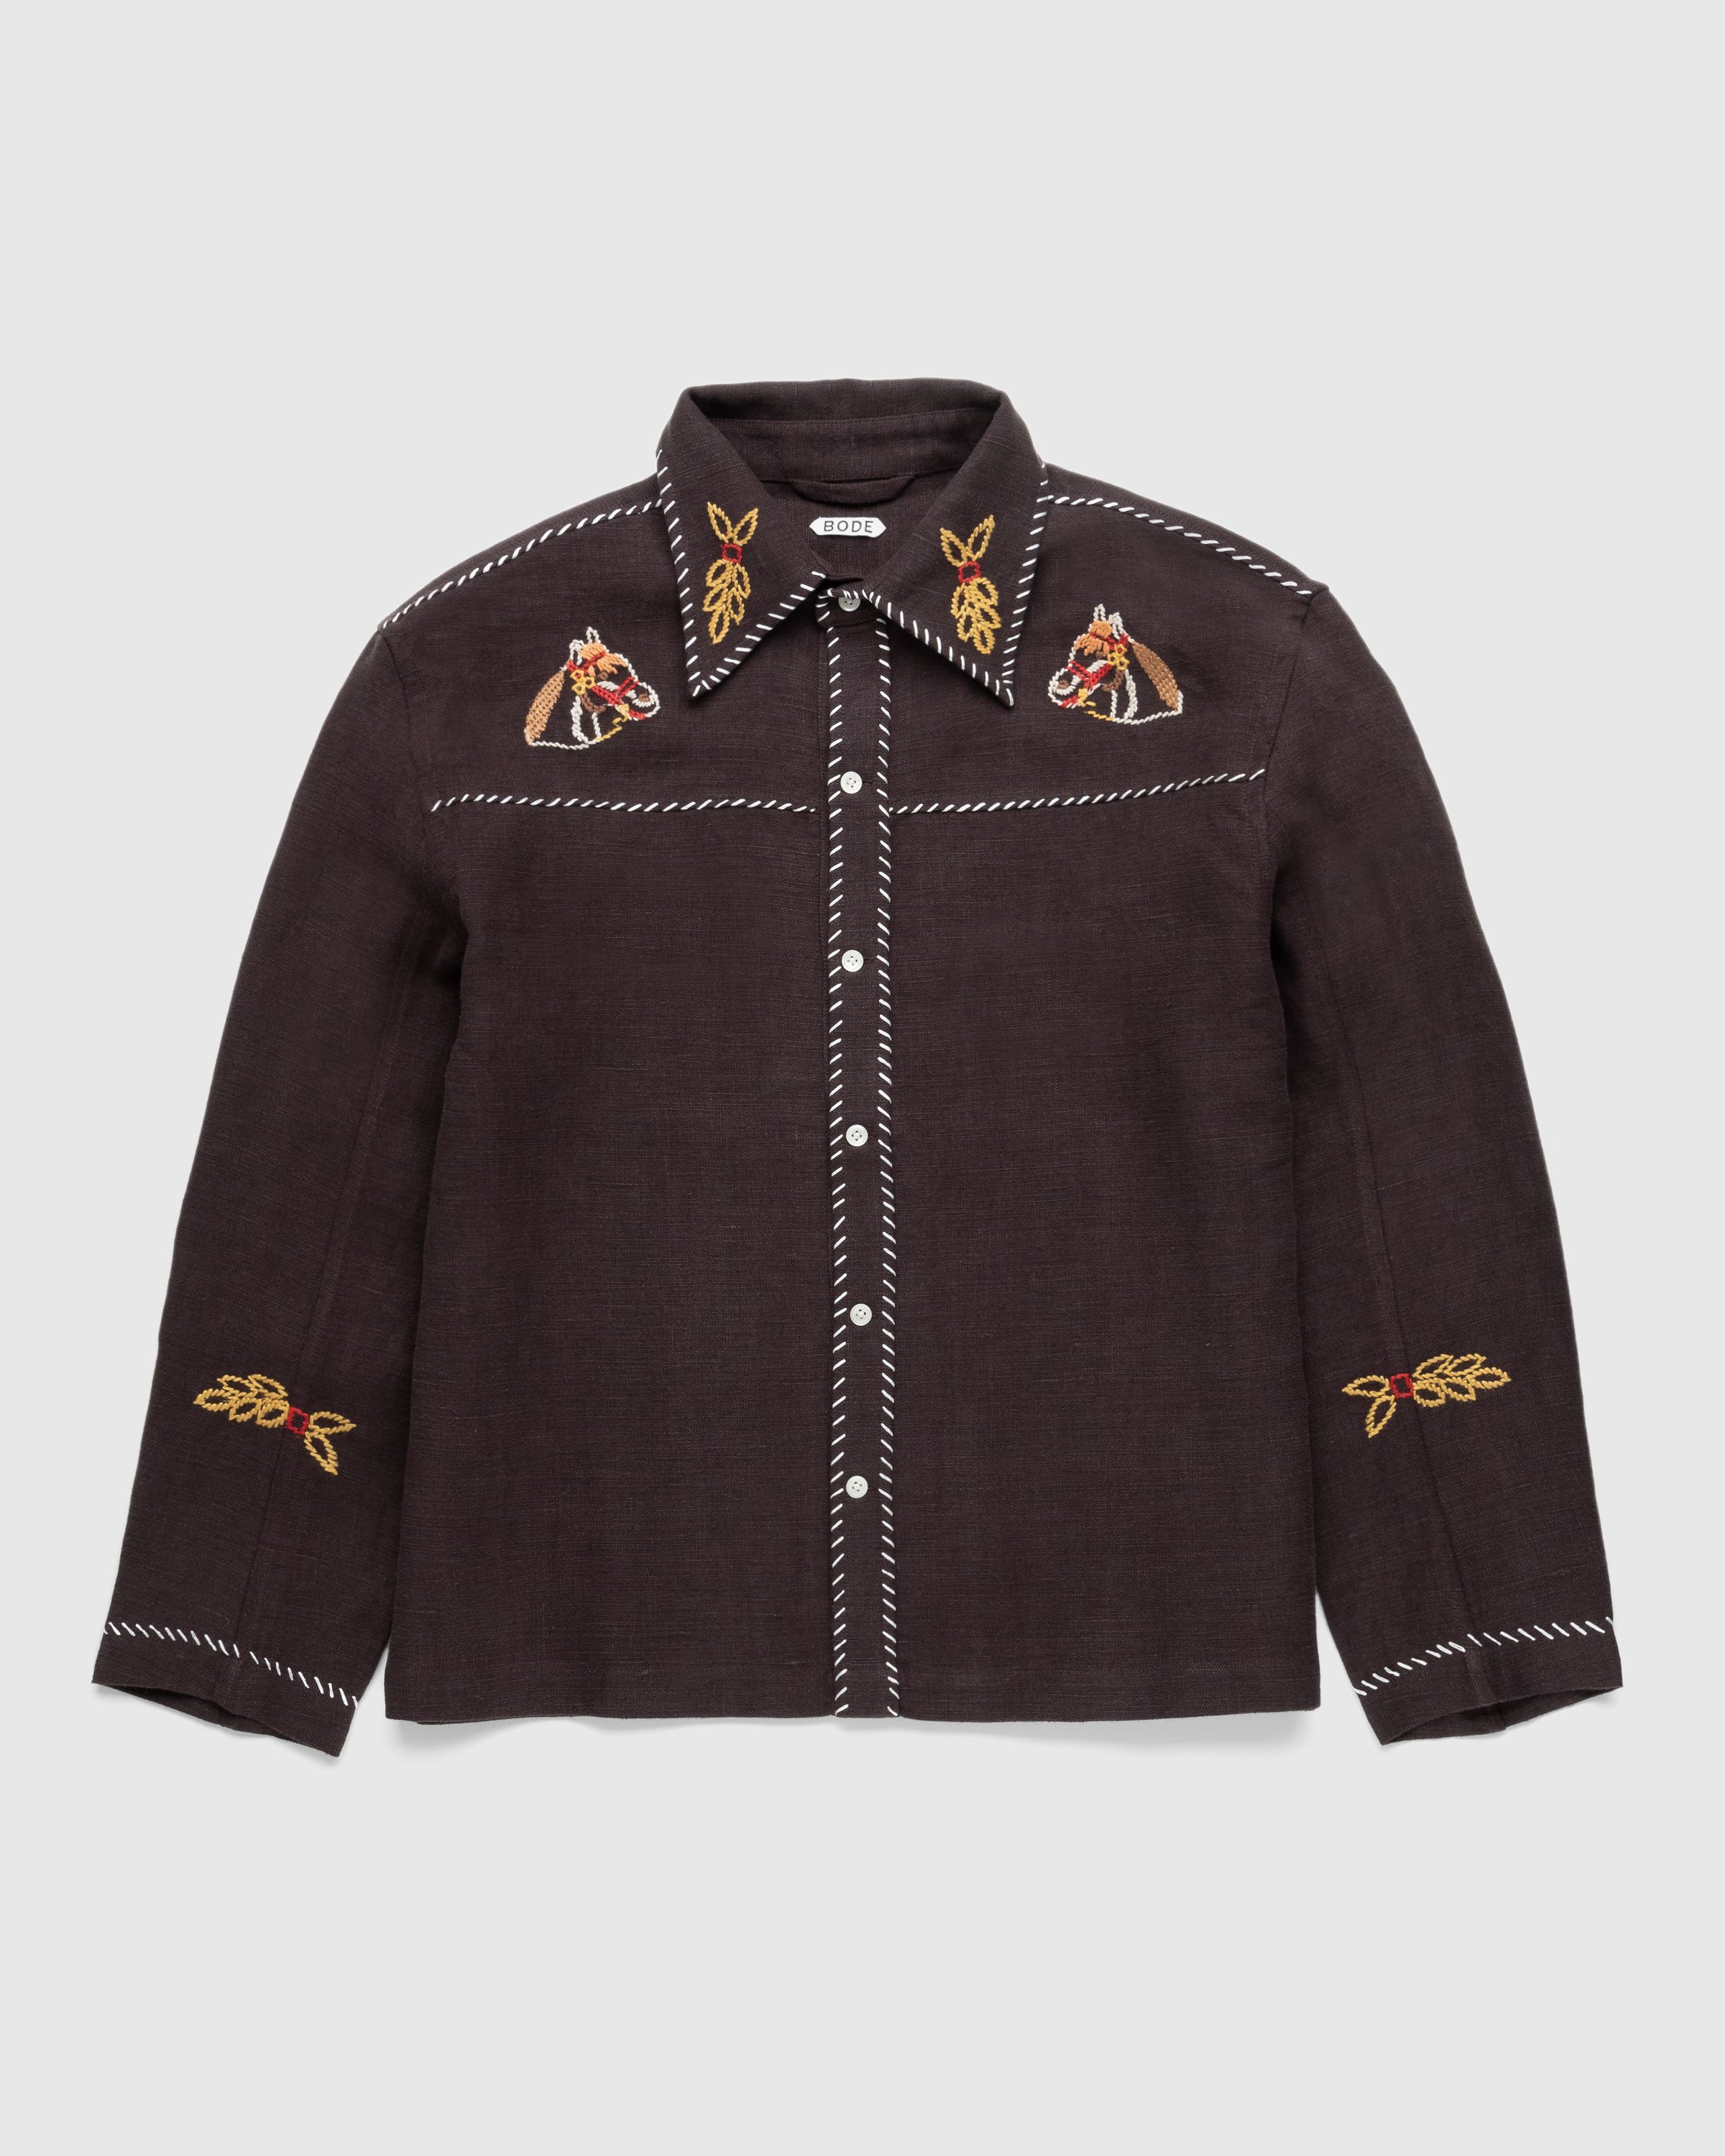 Bode - Show Pony Overshirt Brown - Clothing - BROWN - Image 1